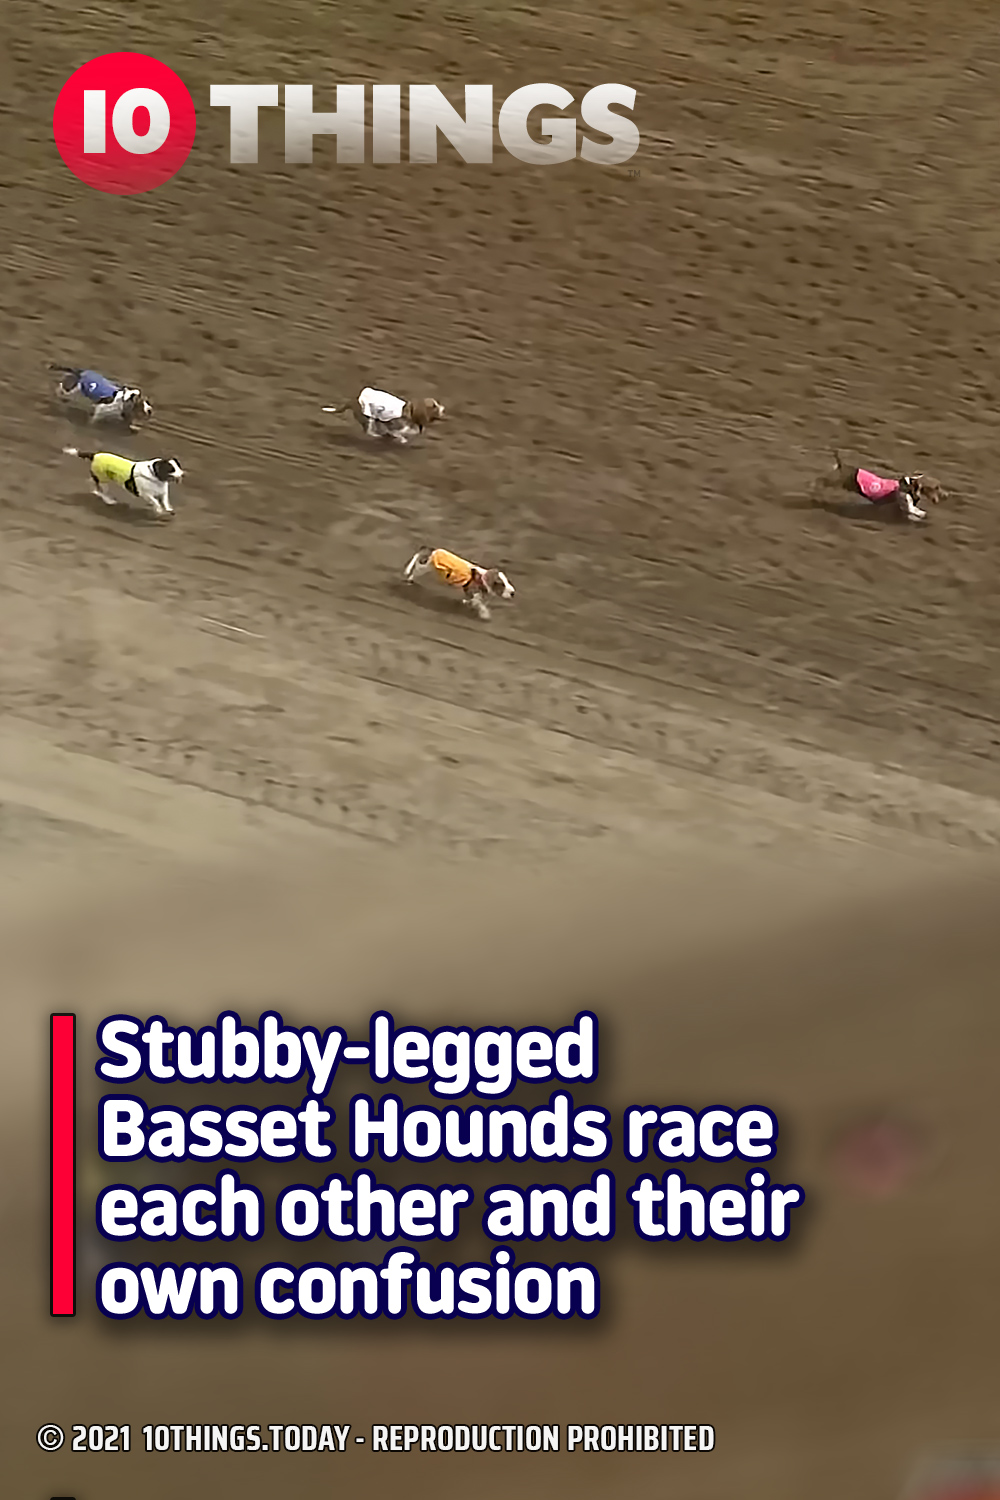 Stubby-legged Basset Hounds race each other and their own confusion